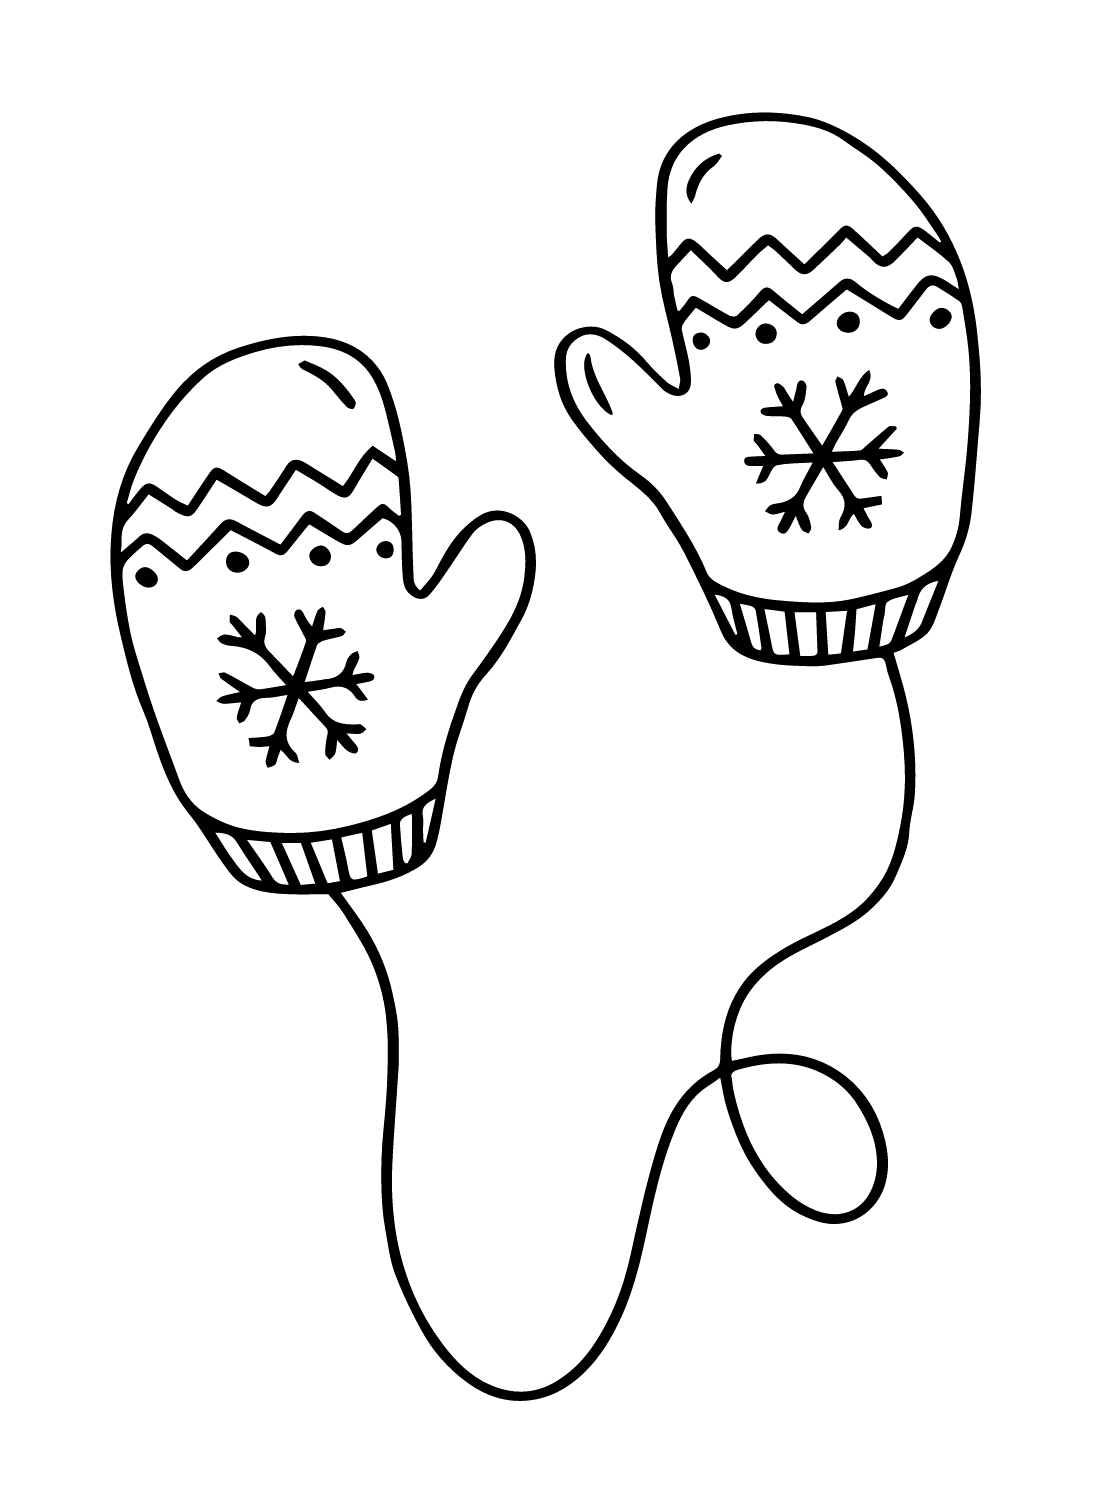 Mittens Winter Free Coloring Page